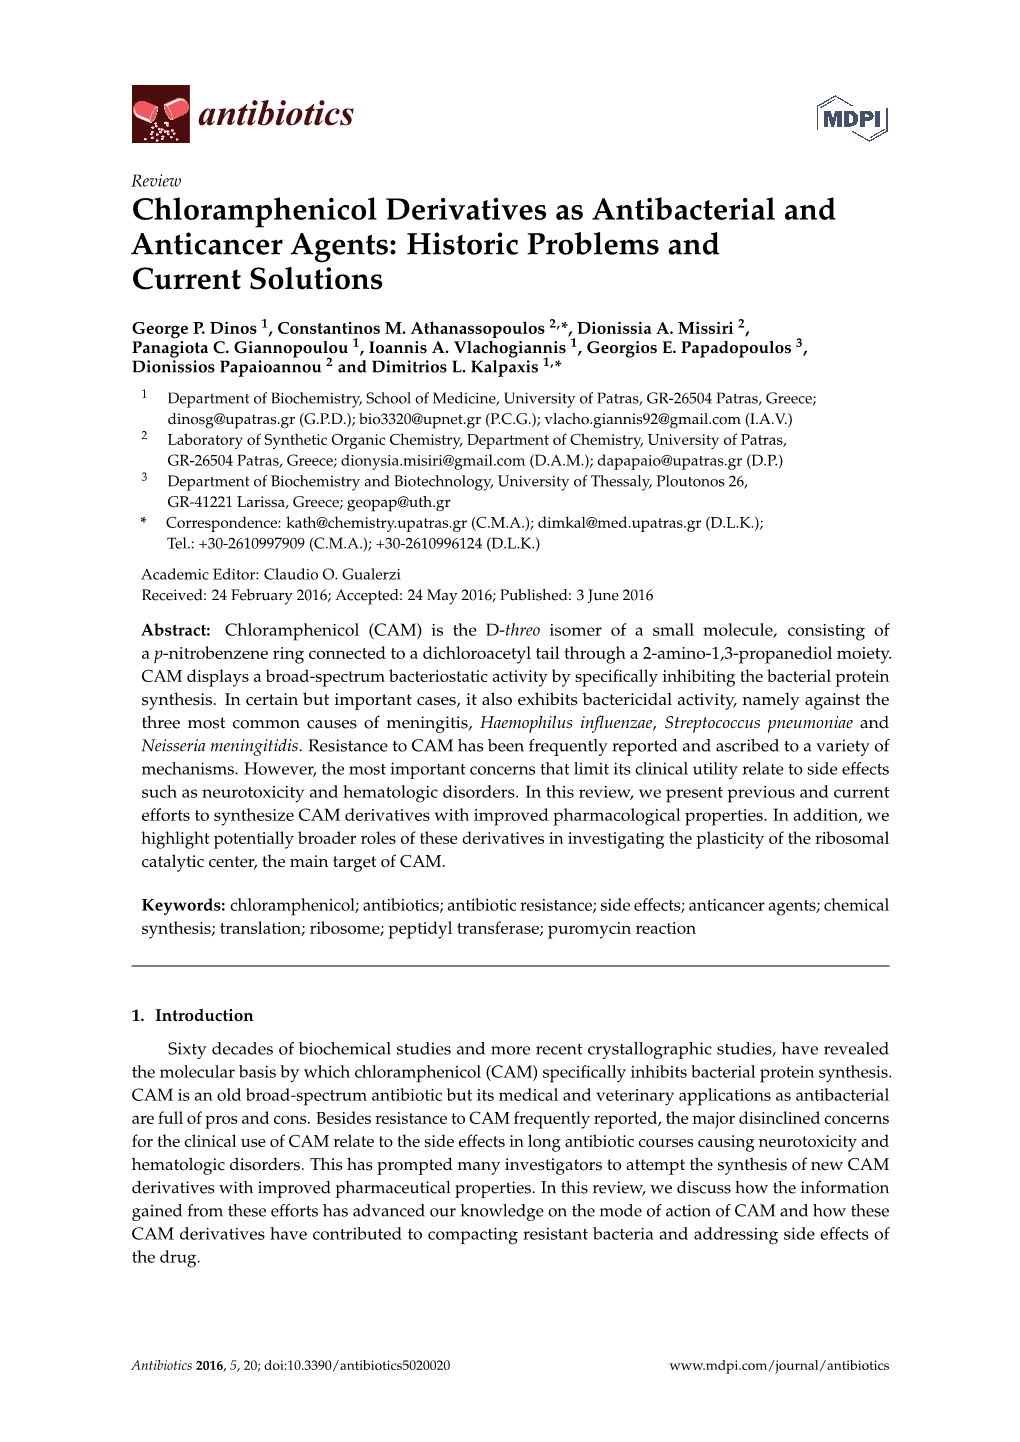 Chloramphenicol Derivatives As Antibacterial and Anticancer Agents: Historic Problems and Current Solutions